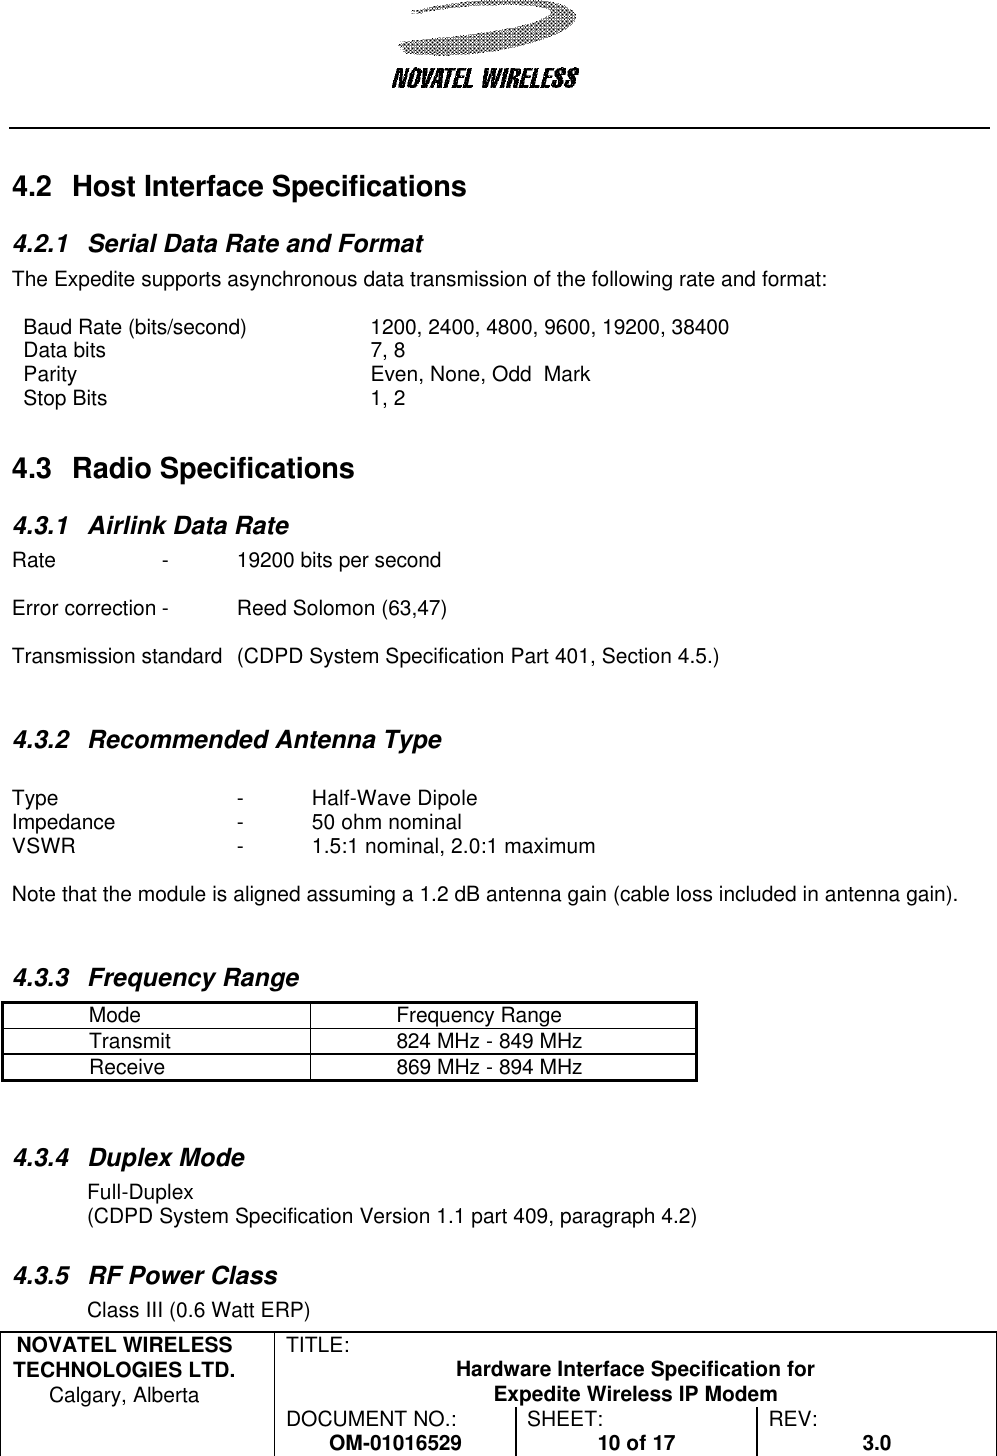   NOVATEL WIRELESS TECHNOLOGIES LTD.  Calgary, Alberta TITLE: Hardware Interface Specification for Expedite Wireless IP Modem  DOCUMENT NO.: OM-01016529 SHEET: 10 of 17 REV: 3.0    4.2 Host Interface Specifications 4.2.1 Serial Data Rate and Format The Expedite supports asynchronous data transmission of the following rate and format:  Baud Rate (bits/second) 1200, 2400, 4800, 9600, 19200, 38400 Data bits 7, 8 Parity Even, None, Odd  Mark Stop Bits  1, 2 4.3 Radio Specifications 4.3.1 Airlink Data Rate Rate  - 19200 bits per second  Error correction - Reed Solomon (63,47)  Transmission standard (CDPD System Specification Part 401, Section 4.5.)   4.3.2 Recommended Antenna Type  Type   - Half-Wave Dipole Impedance   - 50 ohm nominal  VSWR    - 1.5:1 nominal, 2.0:1 maximum  Note that the module is aligned assuming a 1.2 dB antenna gain (cable loss included in antenna gain).   4.3.3 Frequency Range Mode Frequency Range Transmit 824 MHz - 849 MHz Receive 869 MHz - 894 MHz   4.3.4 Duplex Mode Full-Duplex (CDPD System Specification Version 1.1 part 409, paragraph 4.2)  4.3.5 RF Power Class Class III (0.6 Watt ERP) 